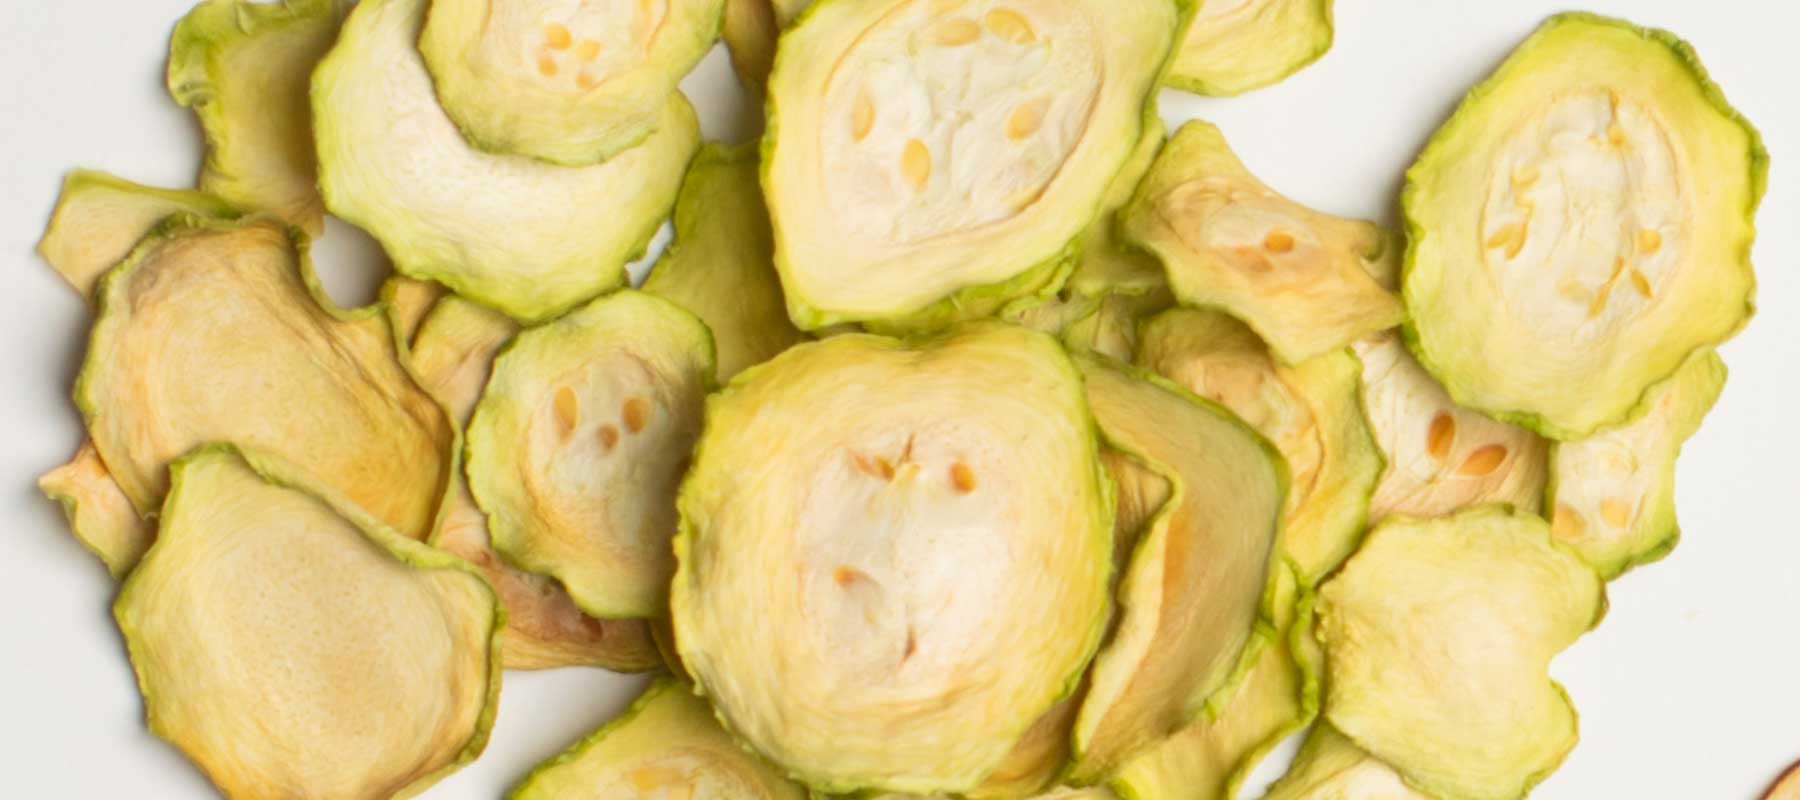 How to make Cucumber Chips